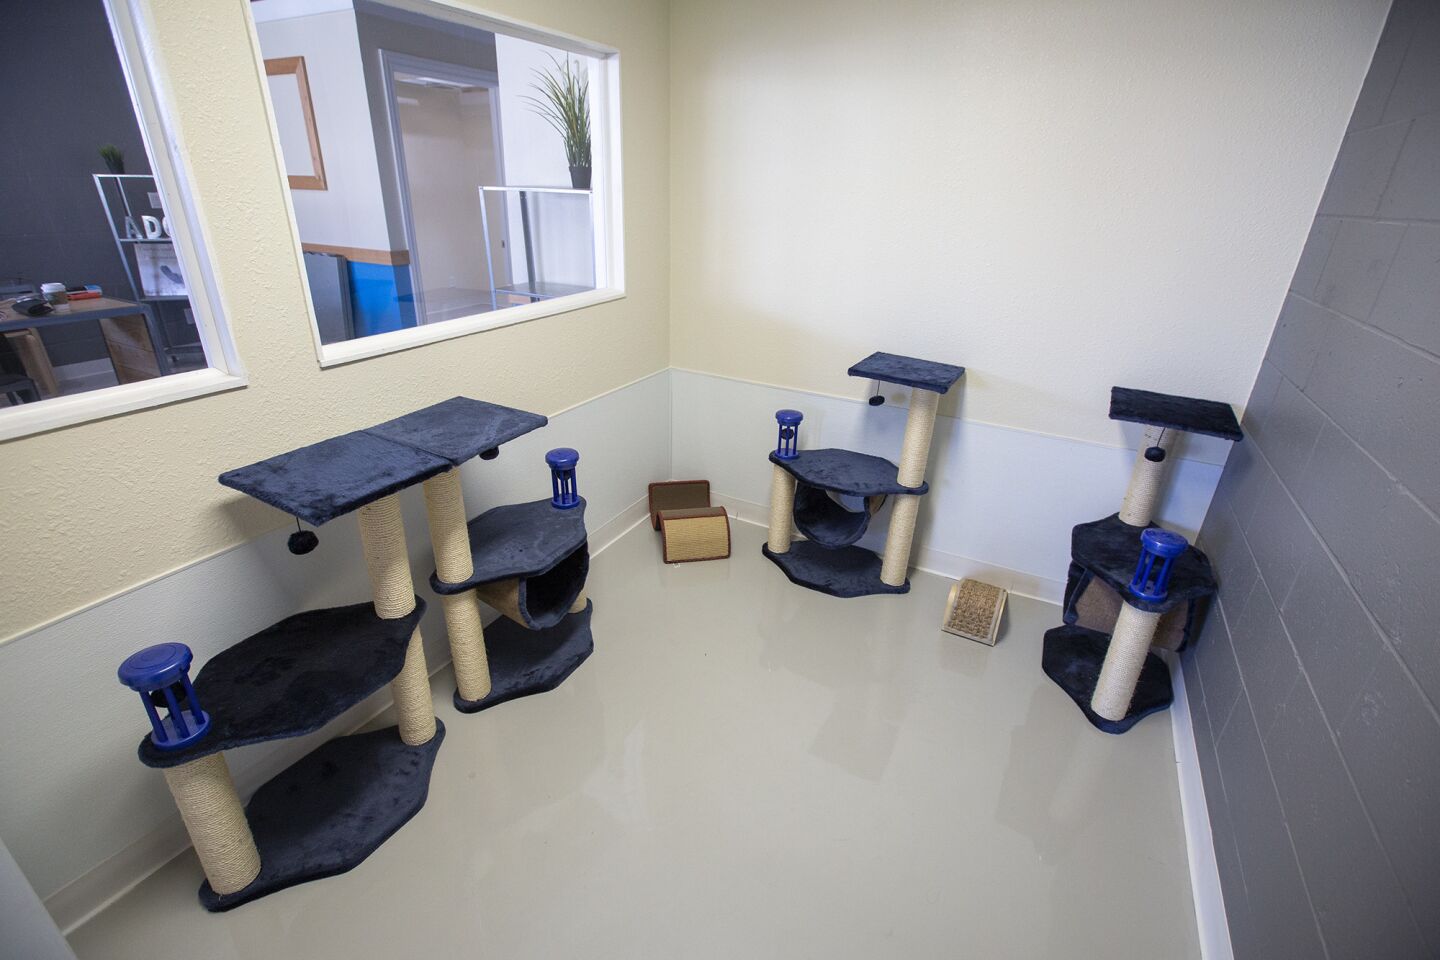 The cat room at the new Orphanage animal adoption center awaits Saturday's grand opening in Costa Mesa.